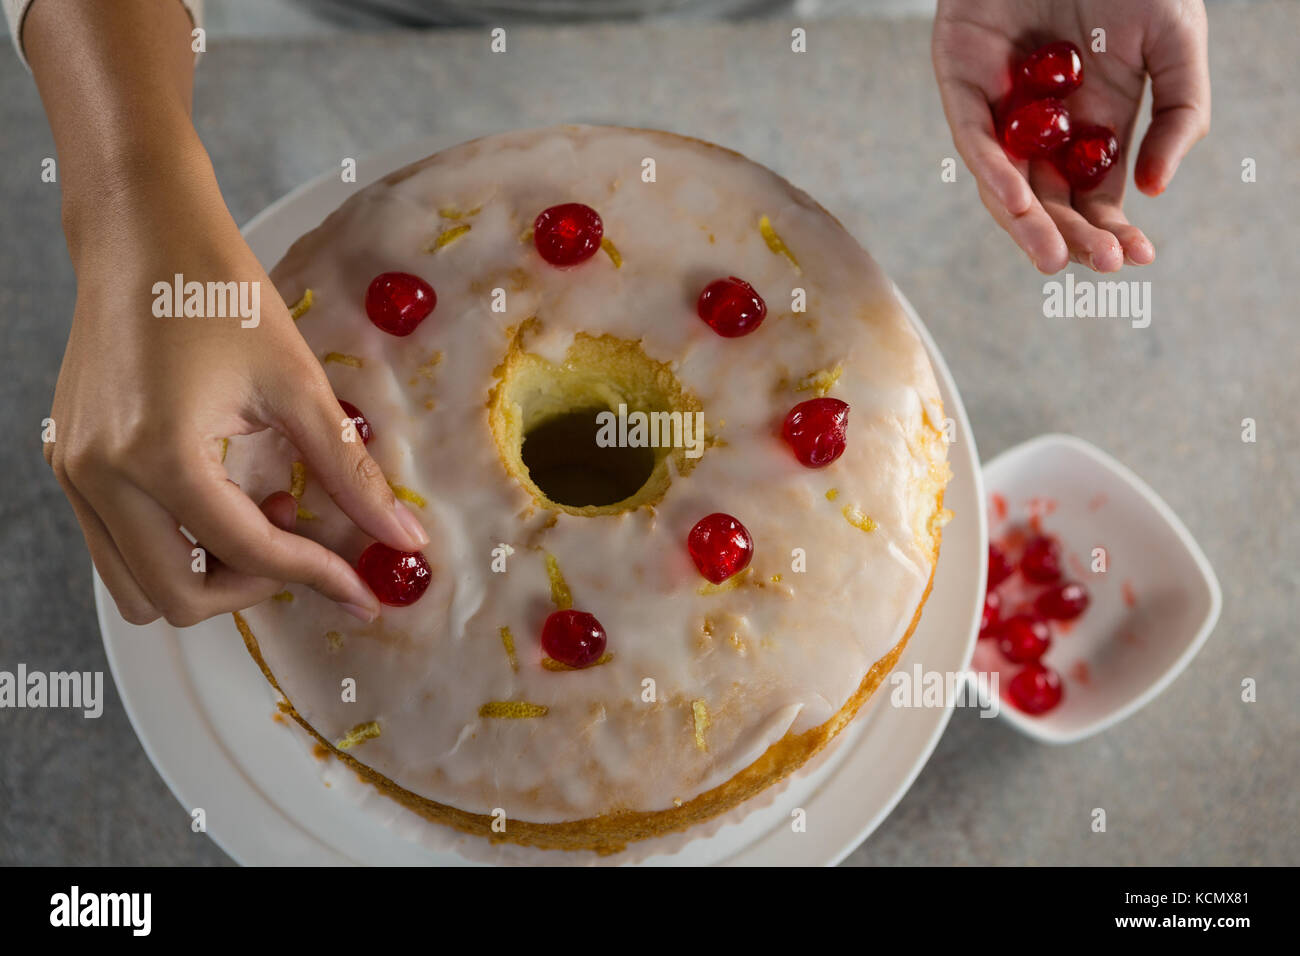 Over head view of woman toping a fresh baked cake with cherry Stock Photo